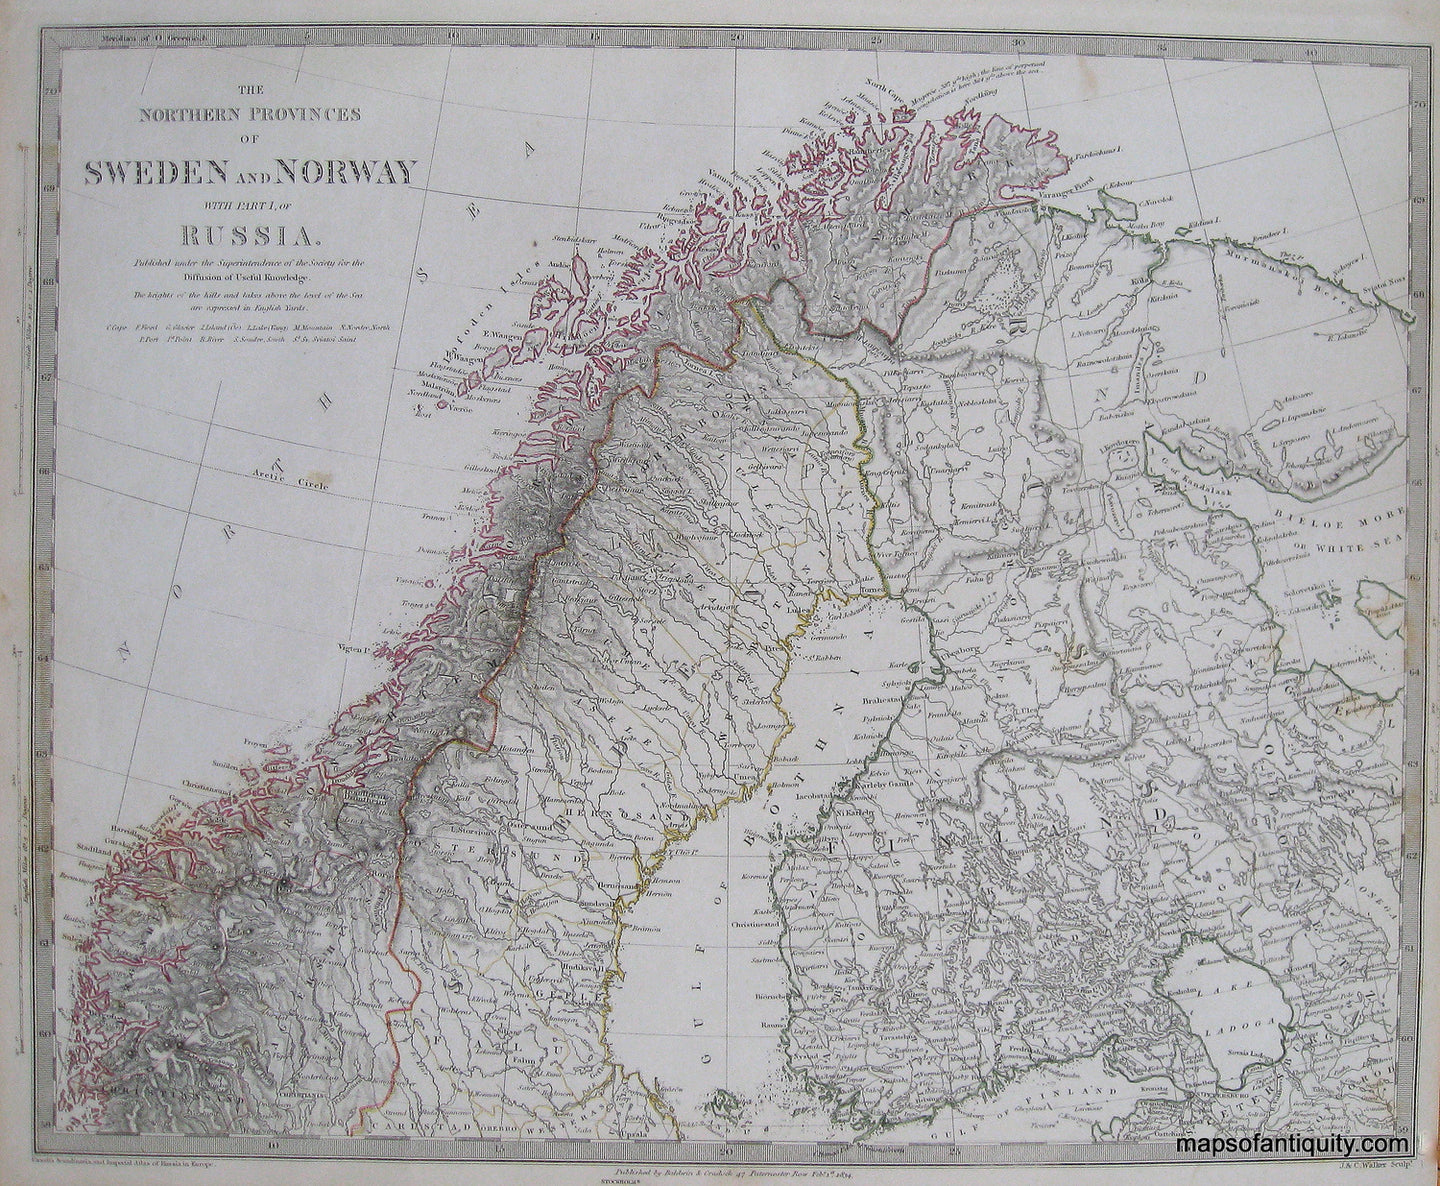 Antique-Hand-Colored-Map-Northern-Provinces-of-Sweden-and-Norway-with-part-of-Russia-Europe-Scandinavia-1834-SDUK/-Society-for-the-Diffusion-of-Useful-Knowledge-Maps-Of-Antiquity